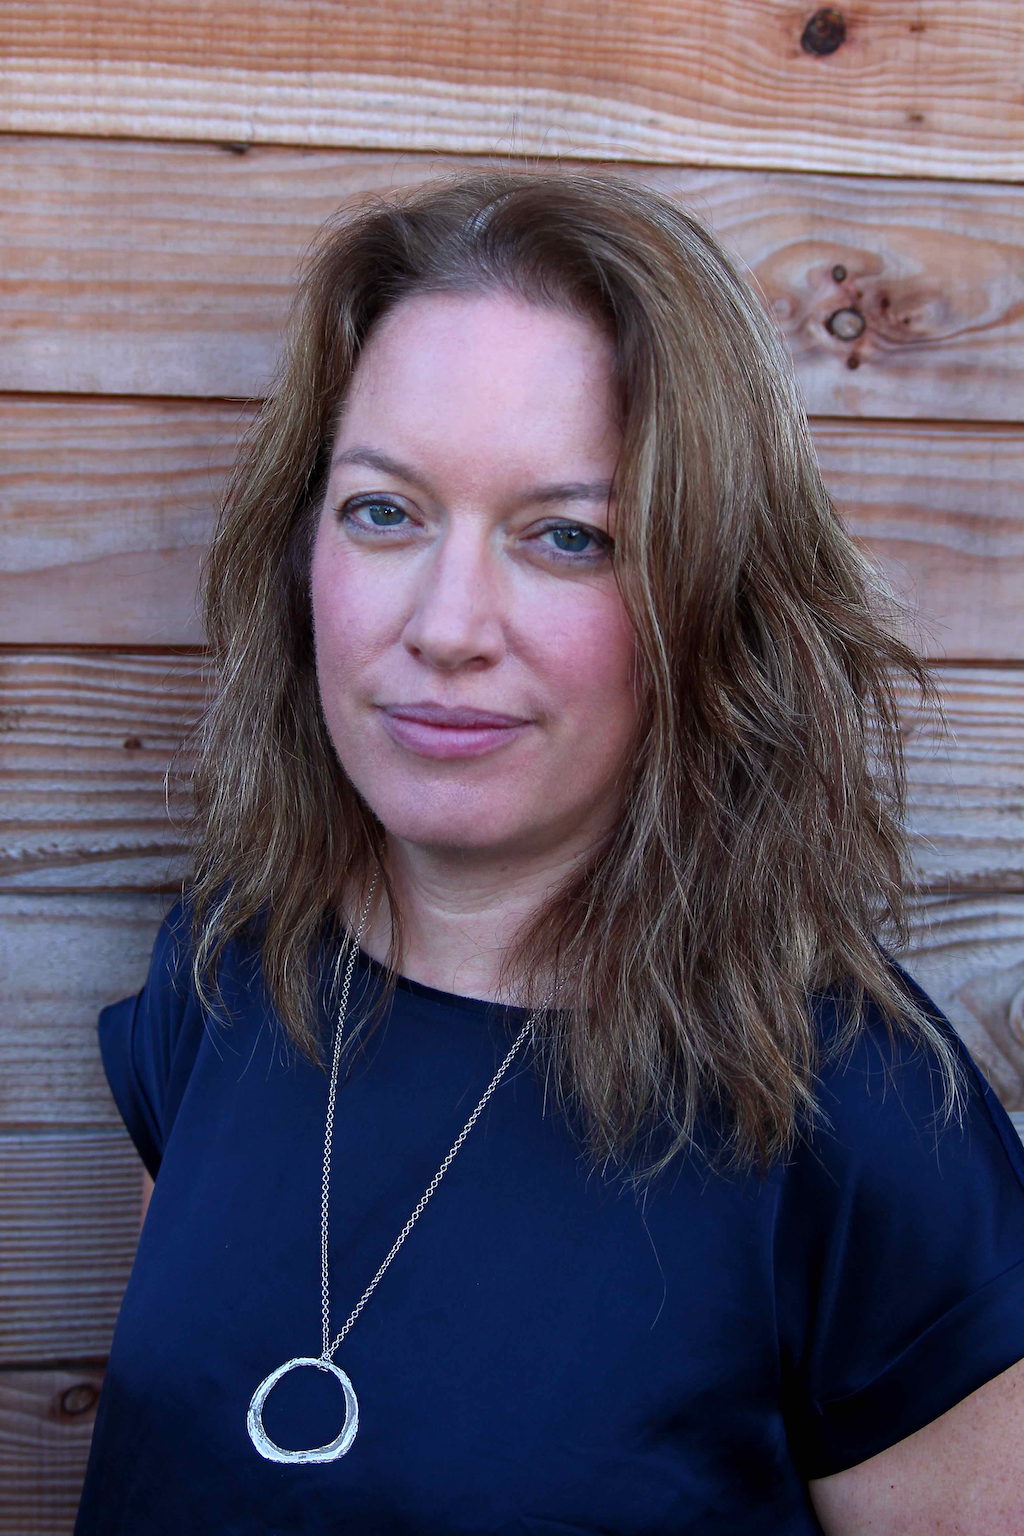 Silvan Skincare Founder Marian. Marian is pictured in a blue shirt with a silver necklace. She has light brown hair with streaks of grey and is standing in front of a wood panelled wall.